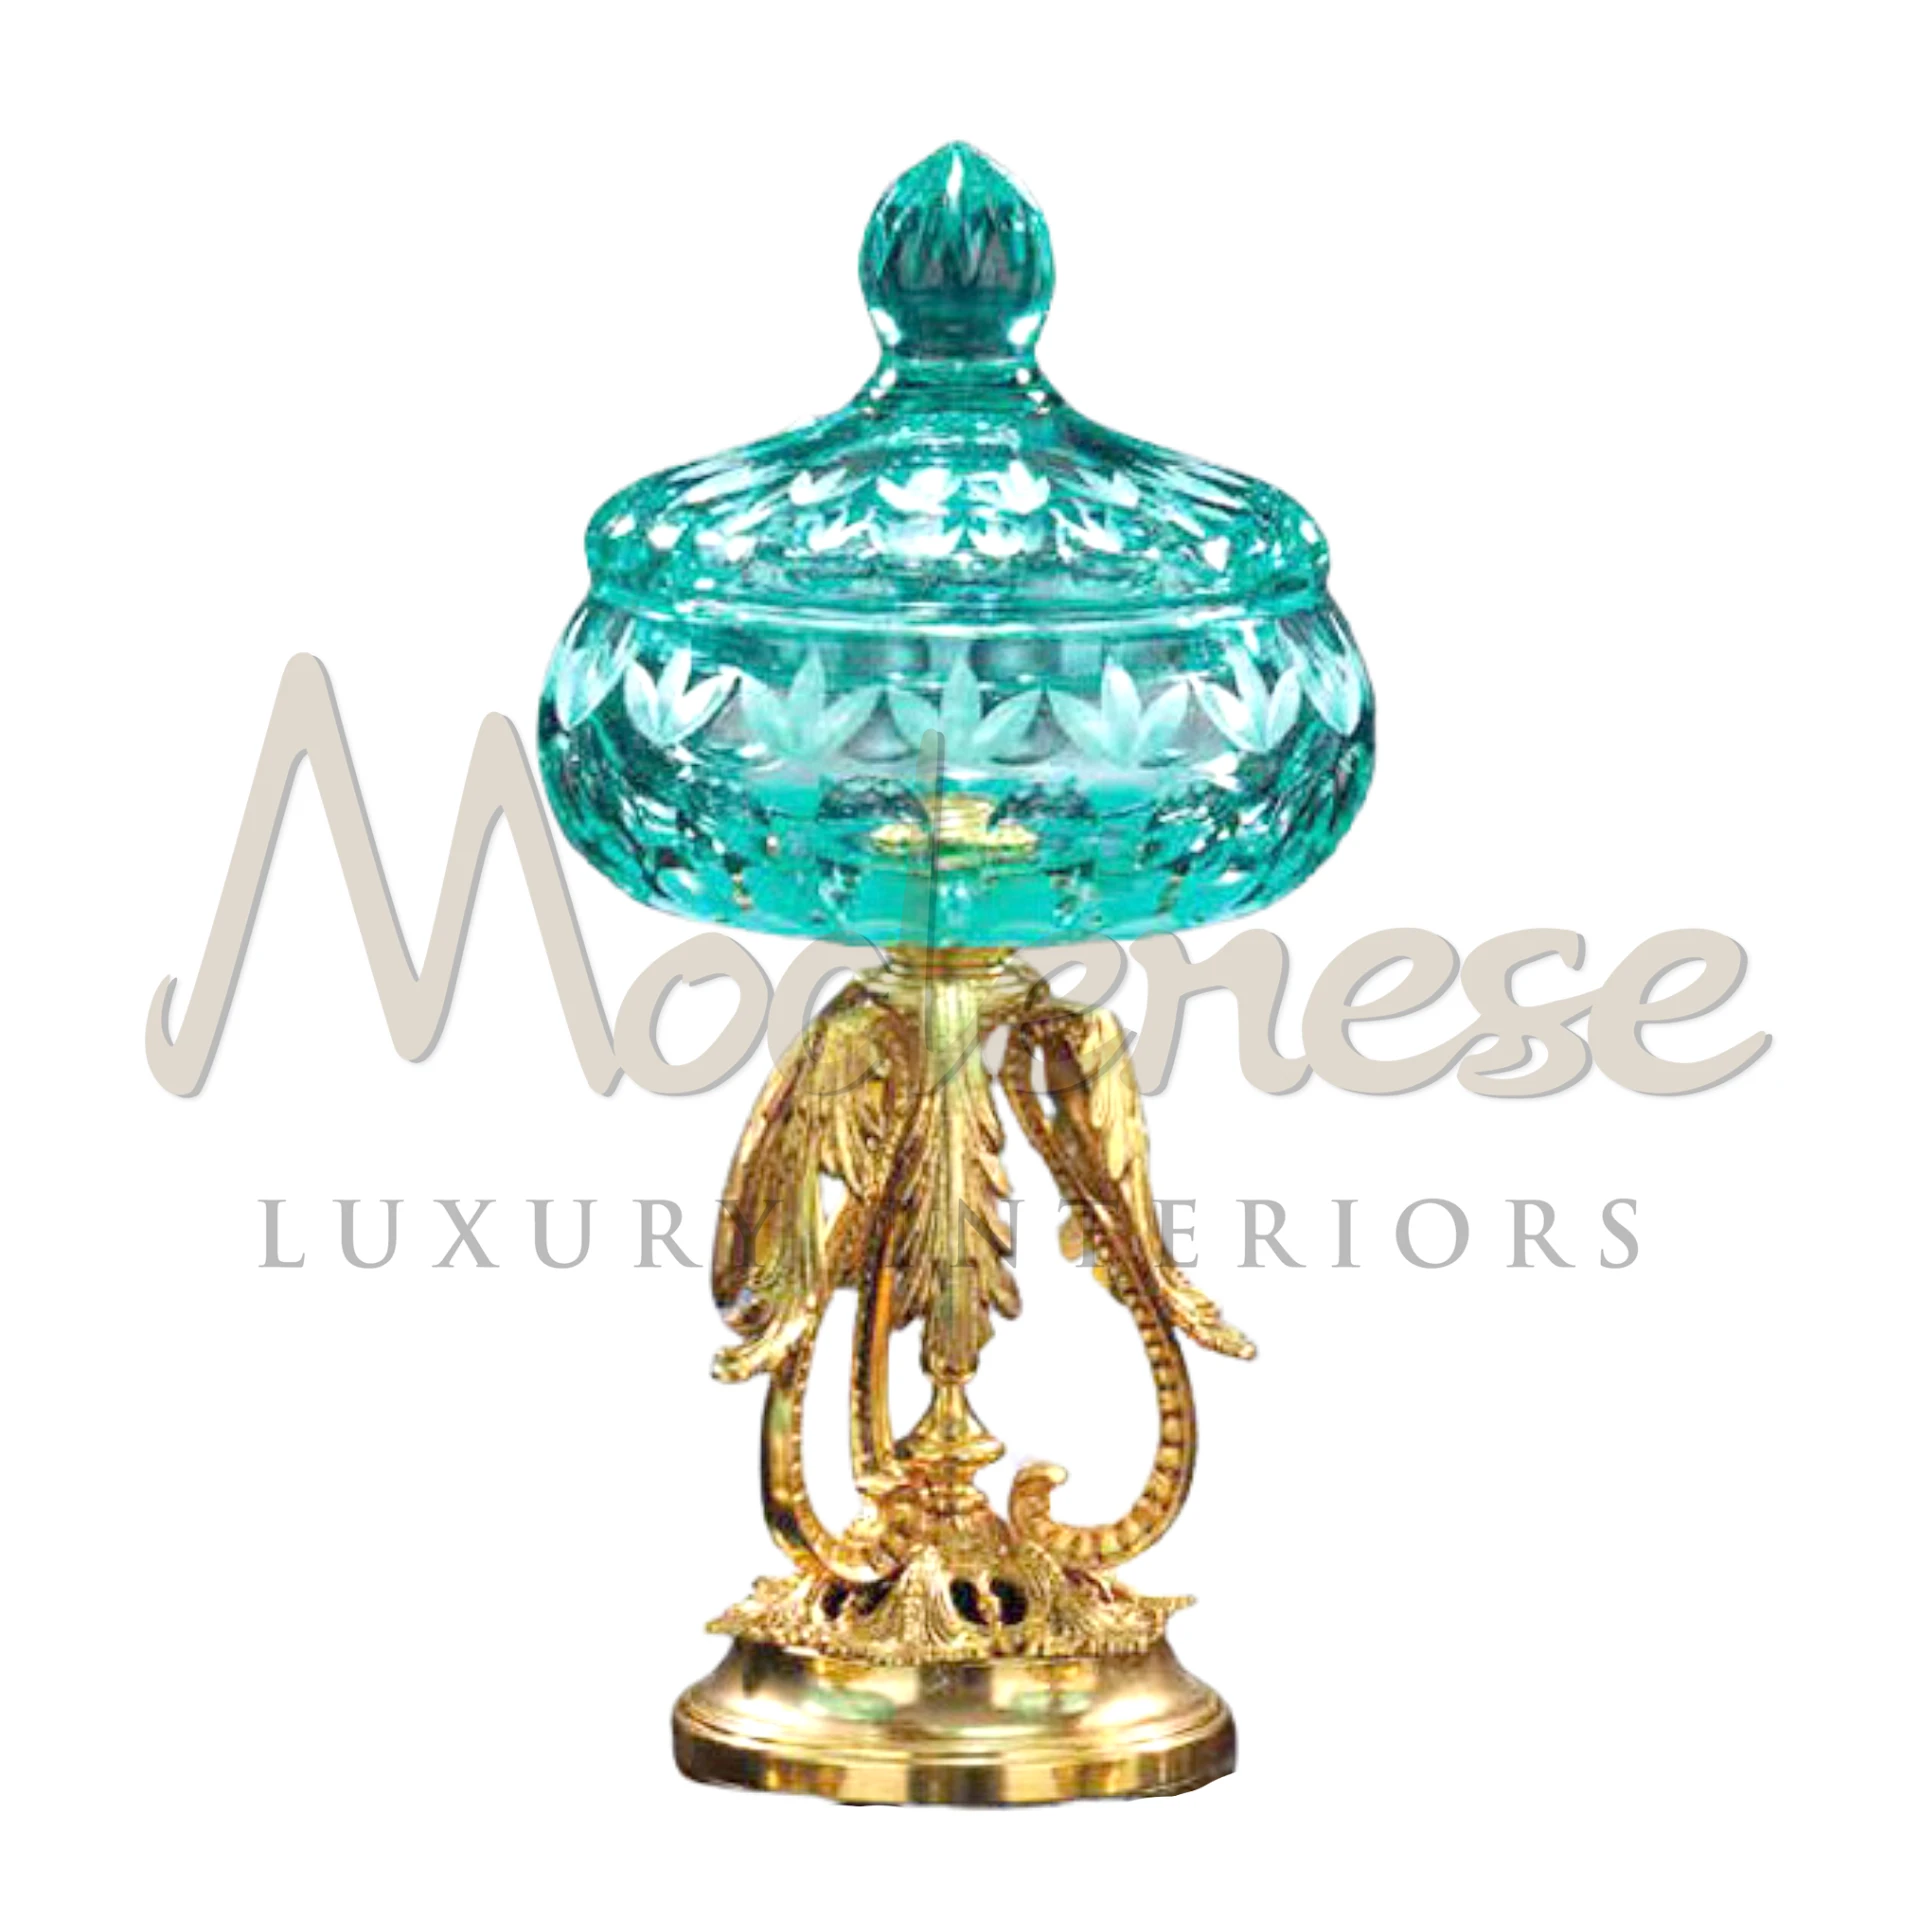 Victorian Pedestal Turquoise Bowl, showcasing luxurious fine porcelain, glass, or crystal with intricate designs, perfect for elegant and classic interiors.